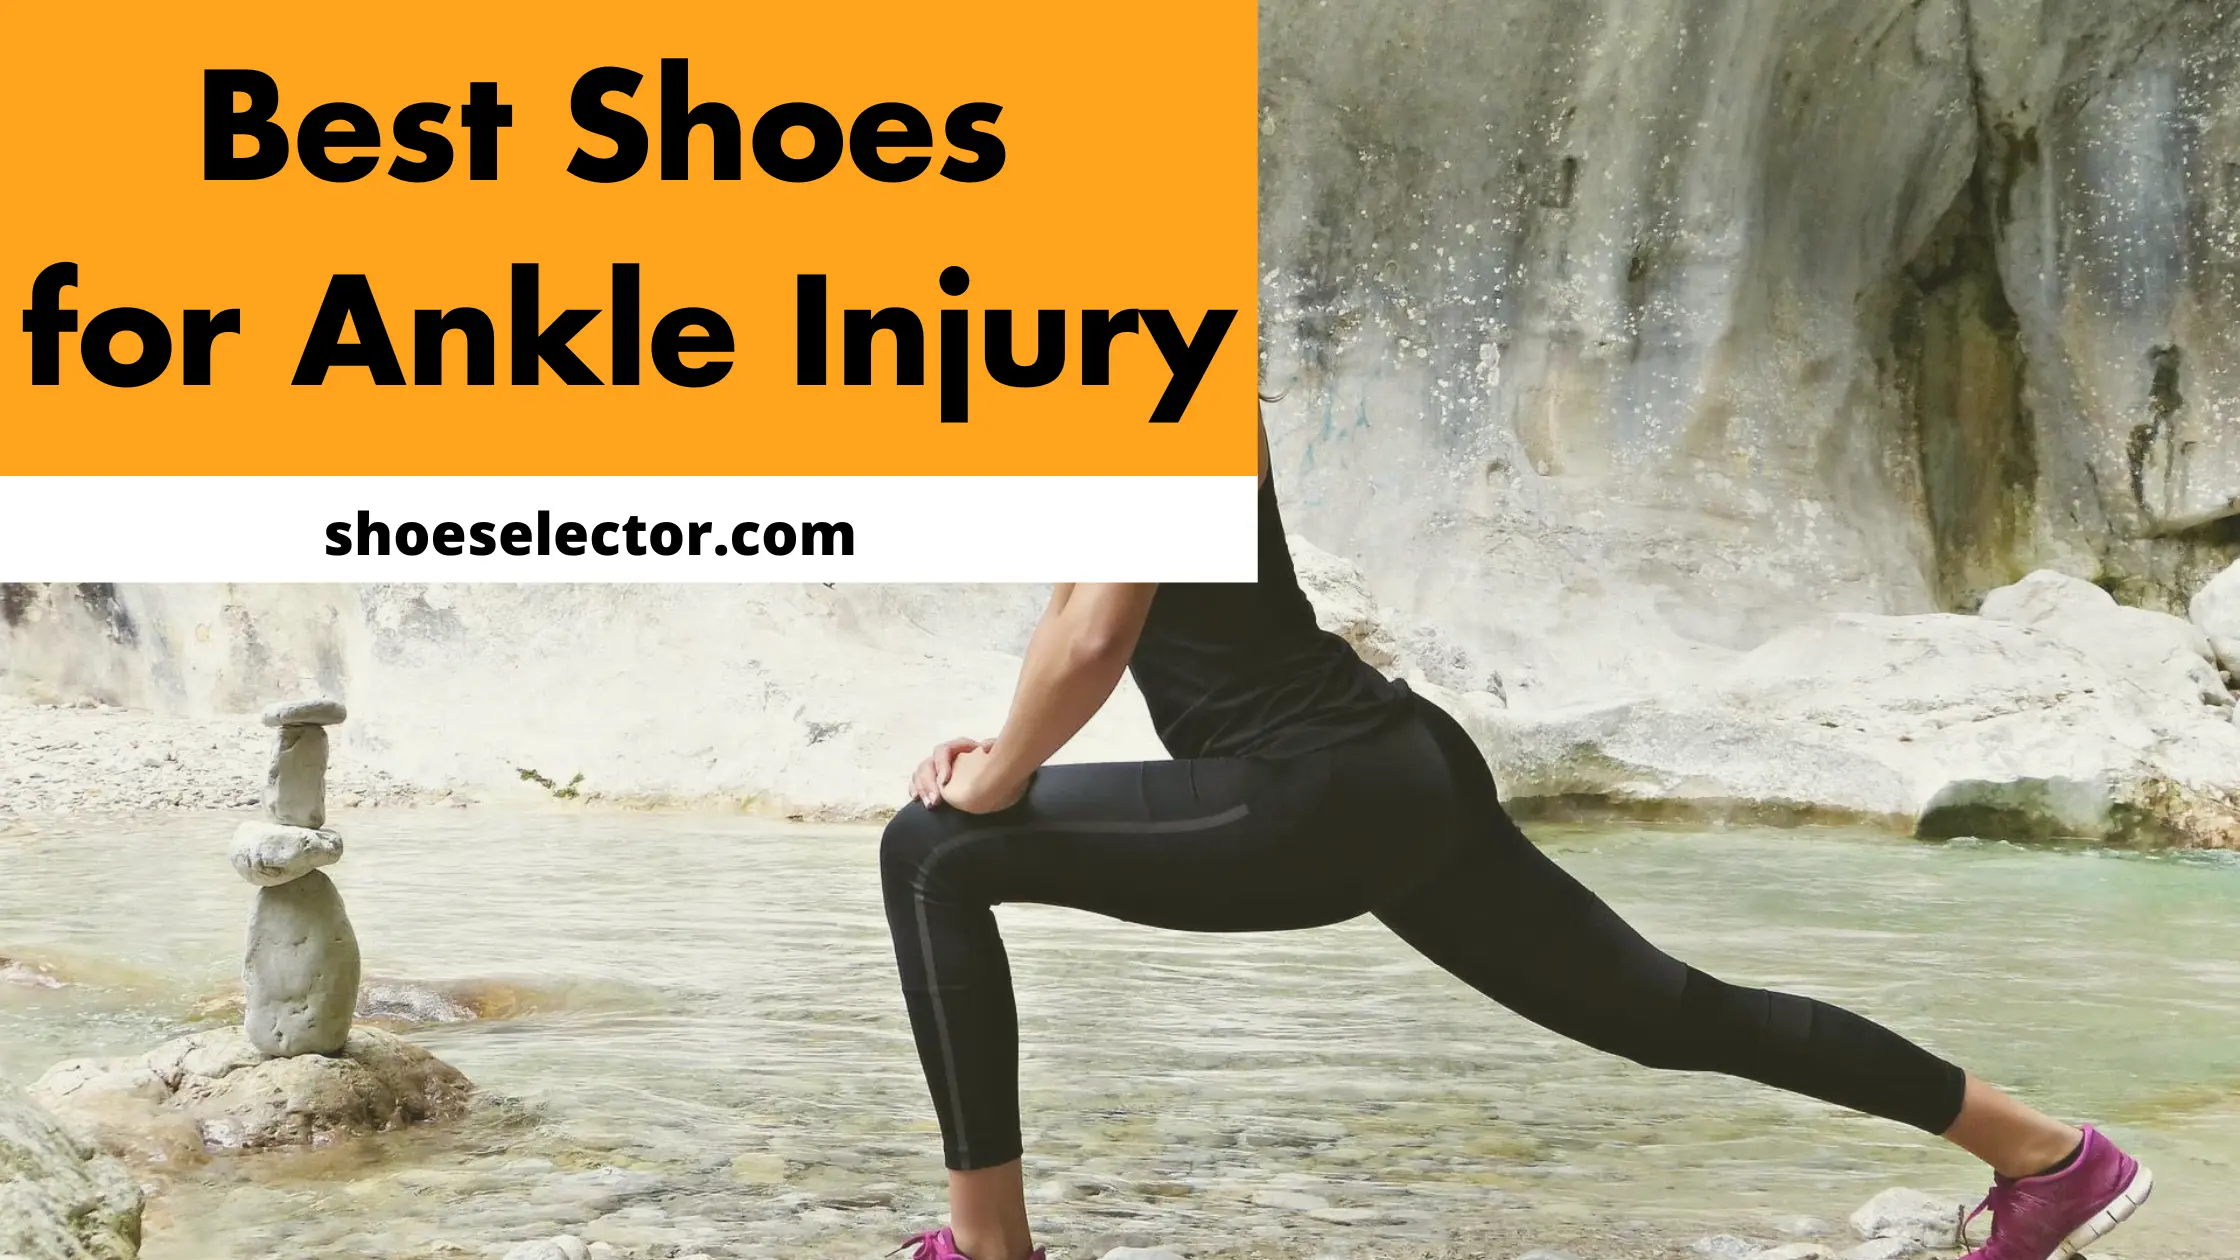 Best Shoes For Ankle Injury - Top Expert's Choice